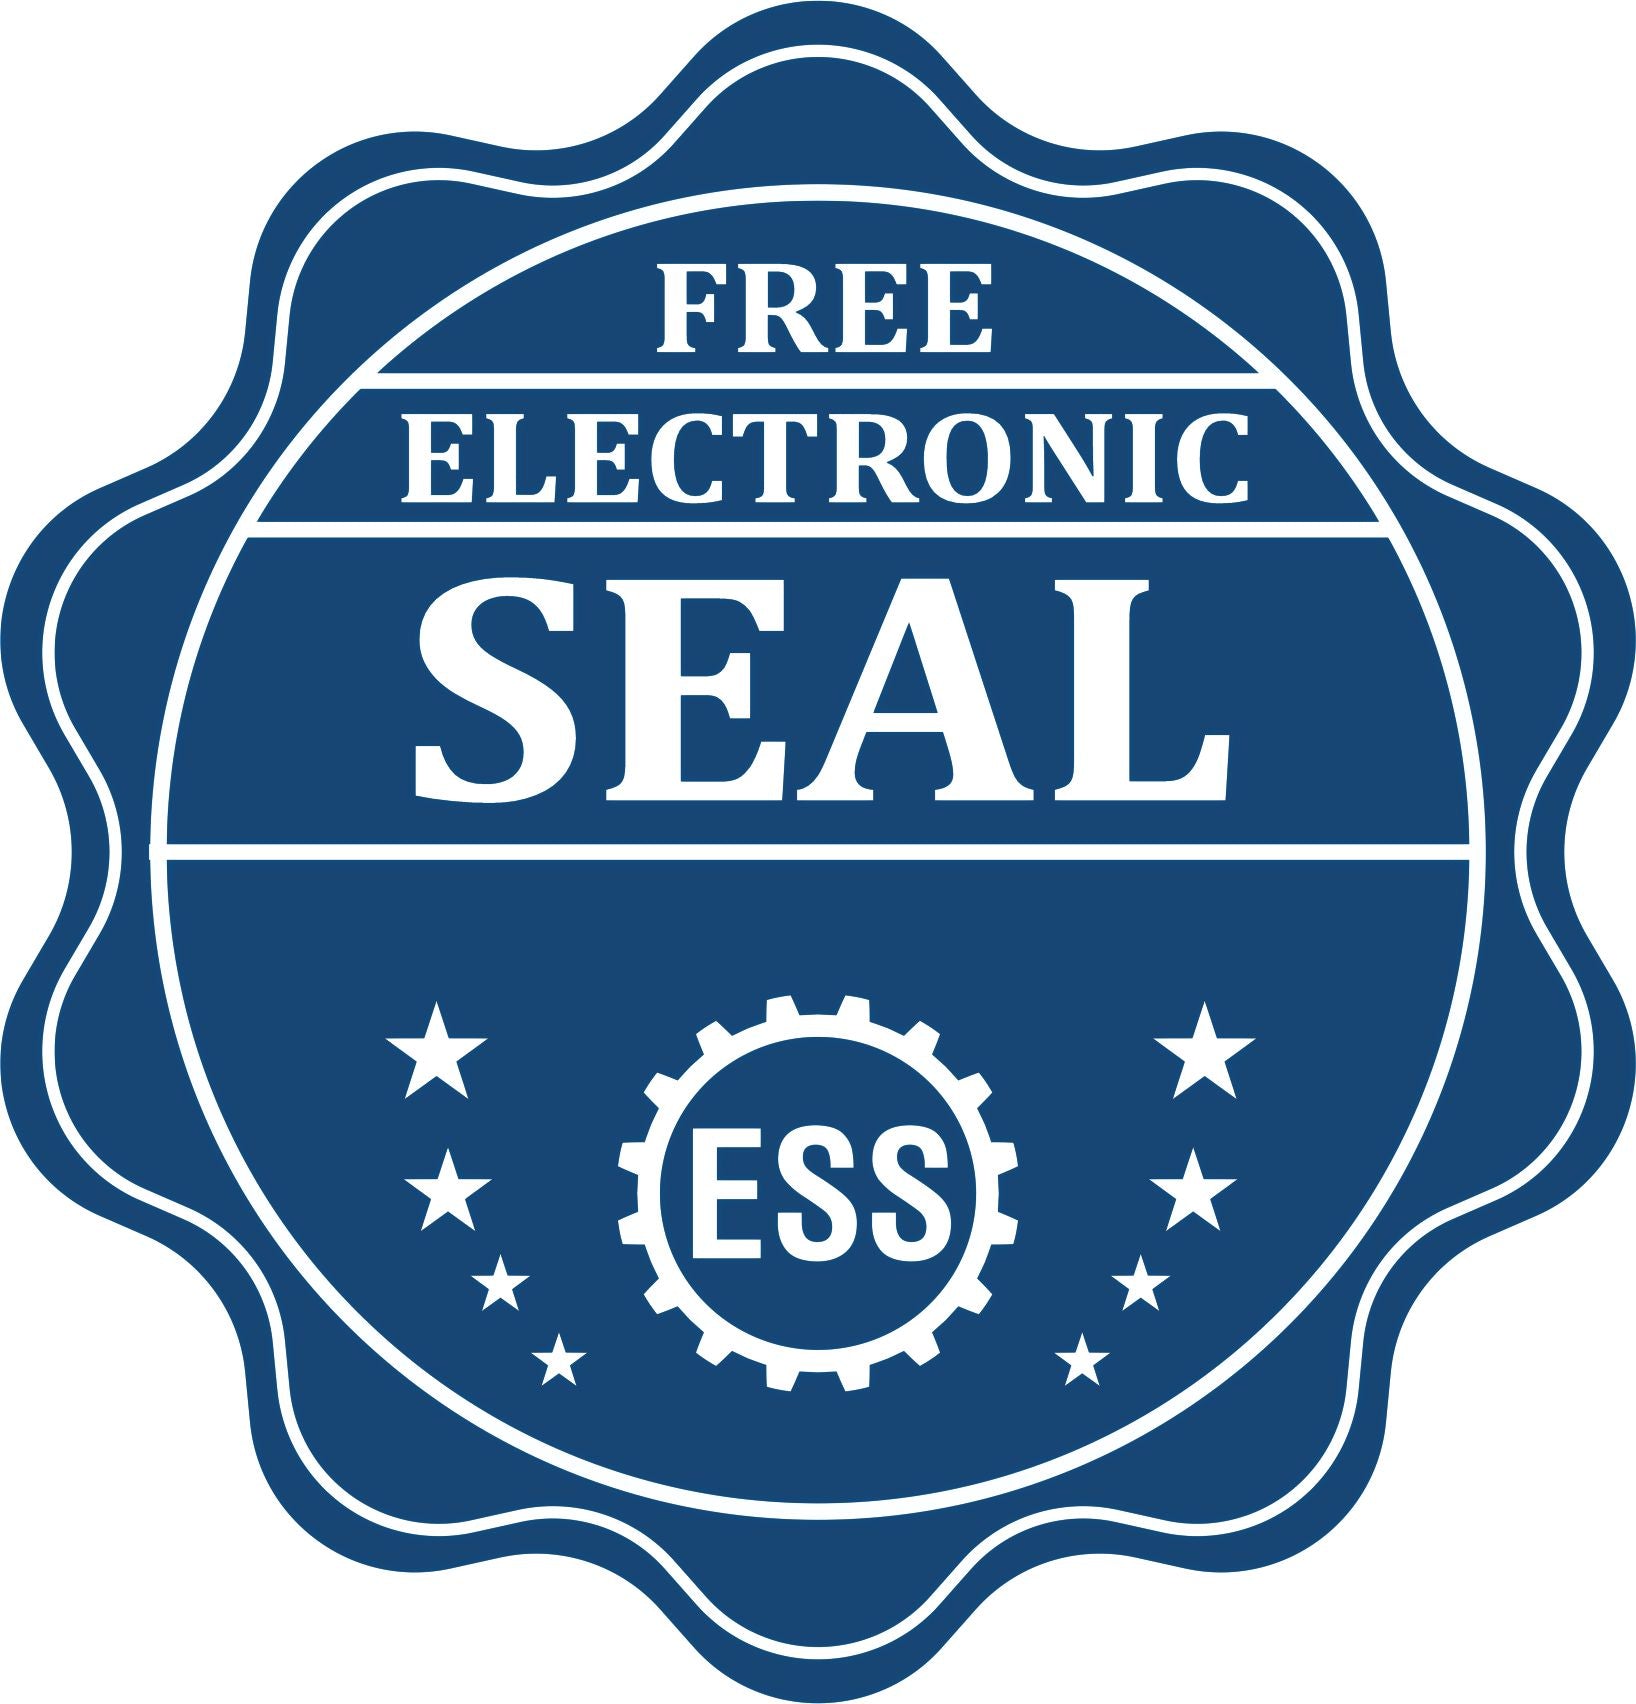 A badge showing a free electronic seal for the Handheld Oregon Professional Engineer Embosser with stars and the ESS gear on the emblem.